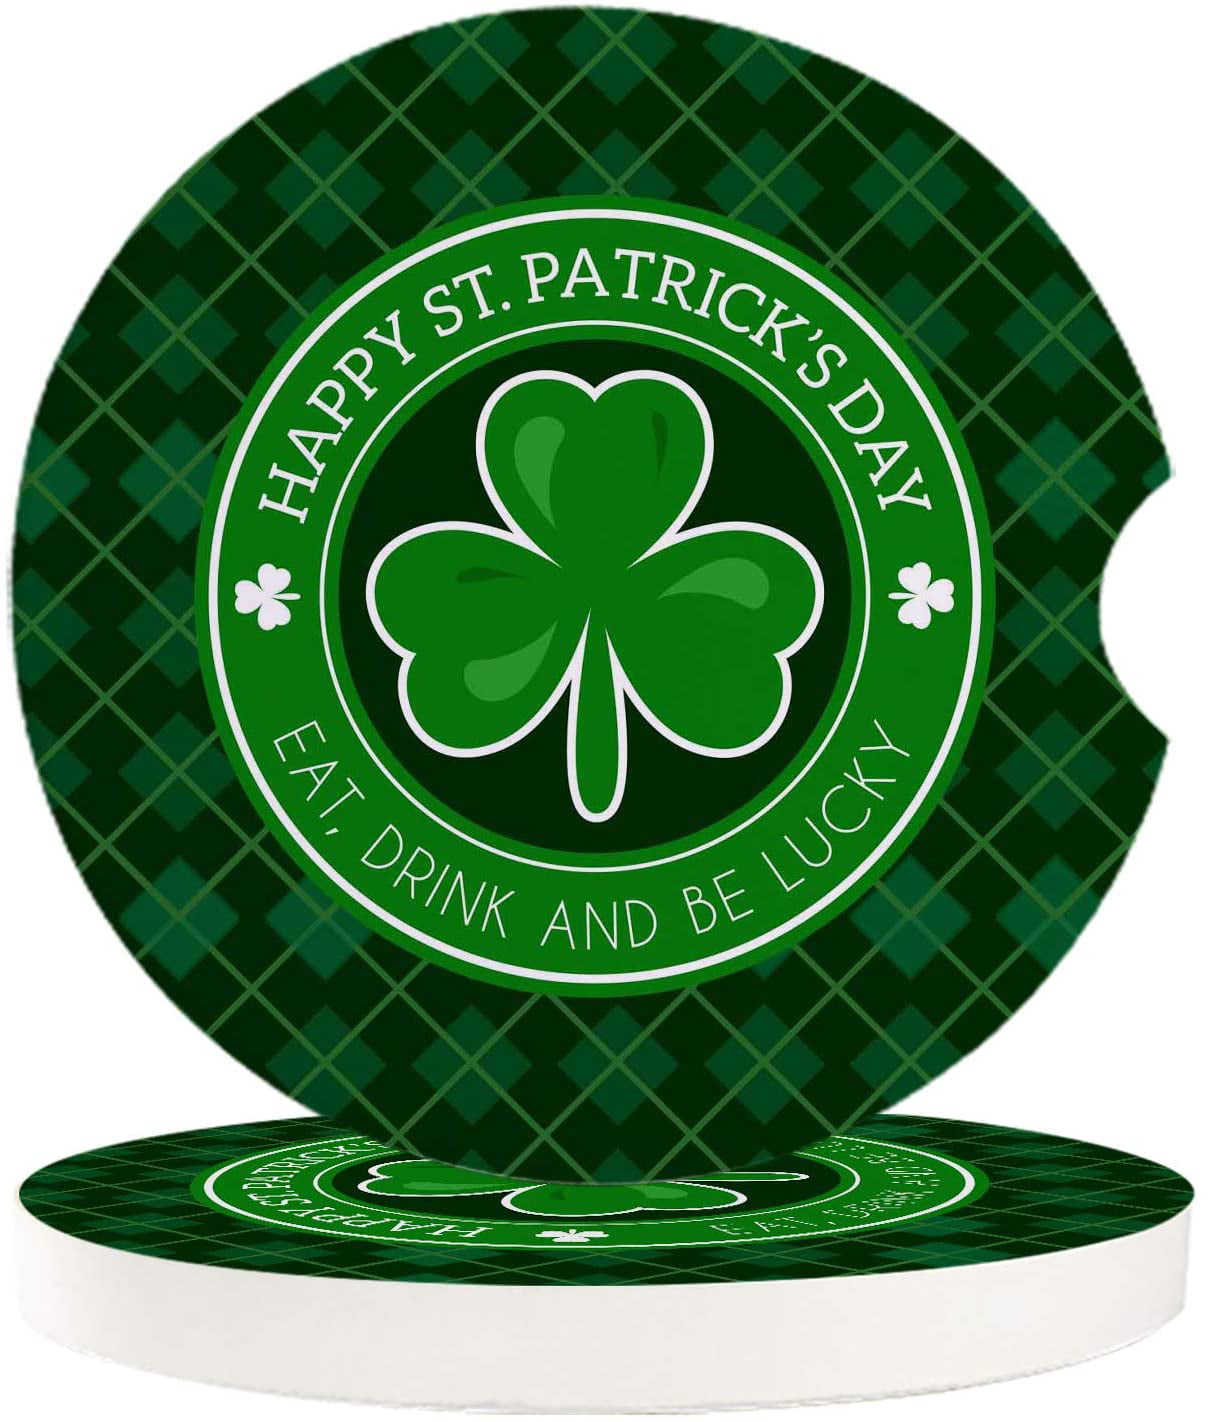 Patrick's Day 2 Pack Cup Holders Car Coasters for Women/Men YOUNGKIDS St Shamrock Plaid Absorbent Ceramic Stone Drinks Coaster Set Green Buffalo Check 